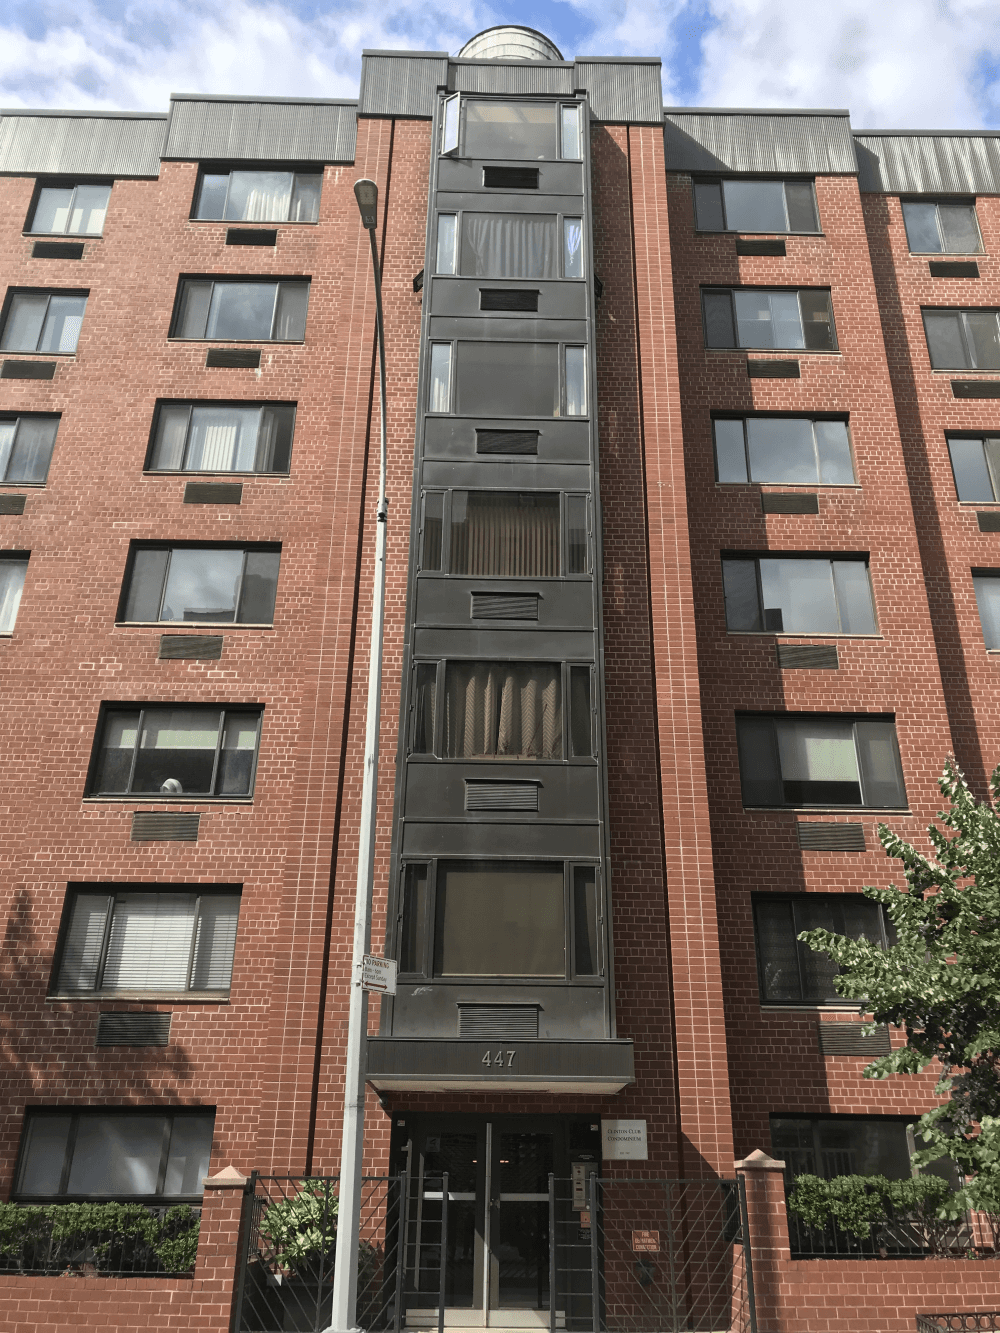 7 Stories, 34 Units, 1986 Built, Elevator, Laundry in Building.